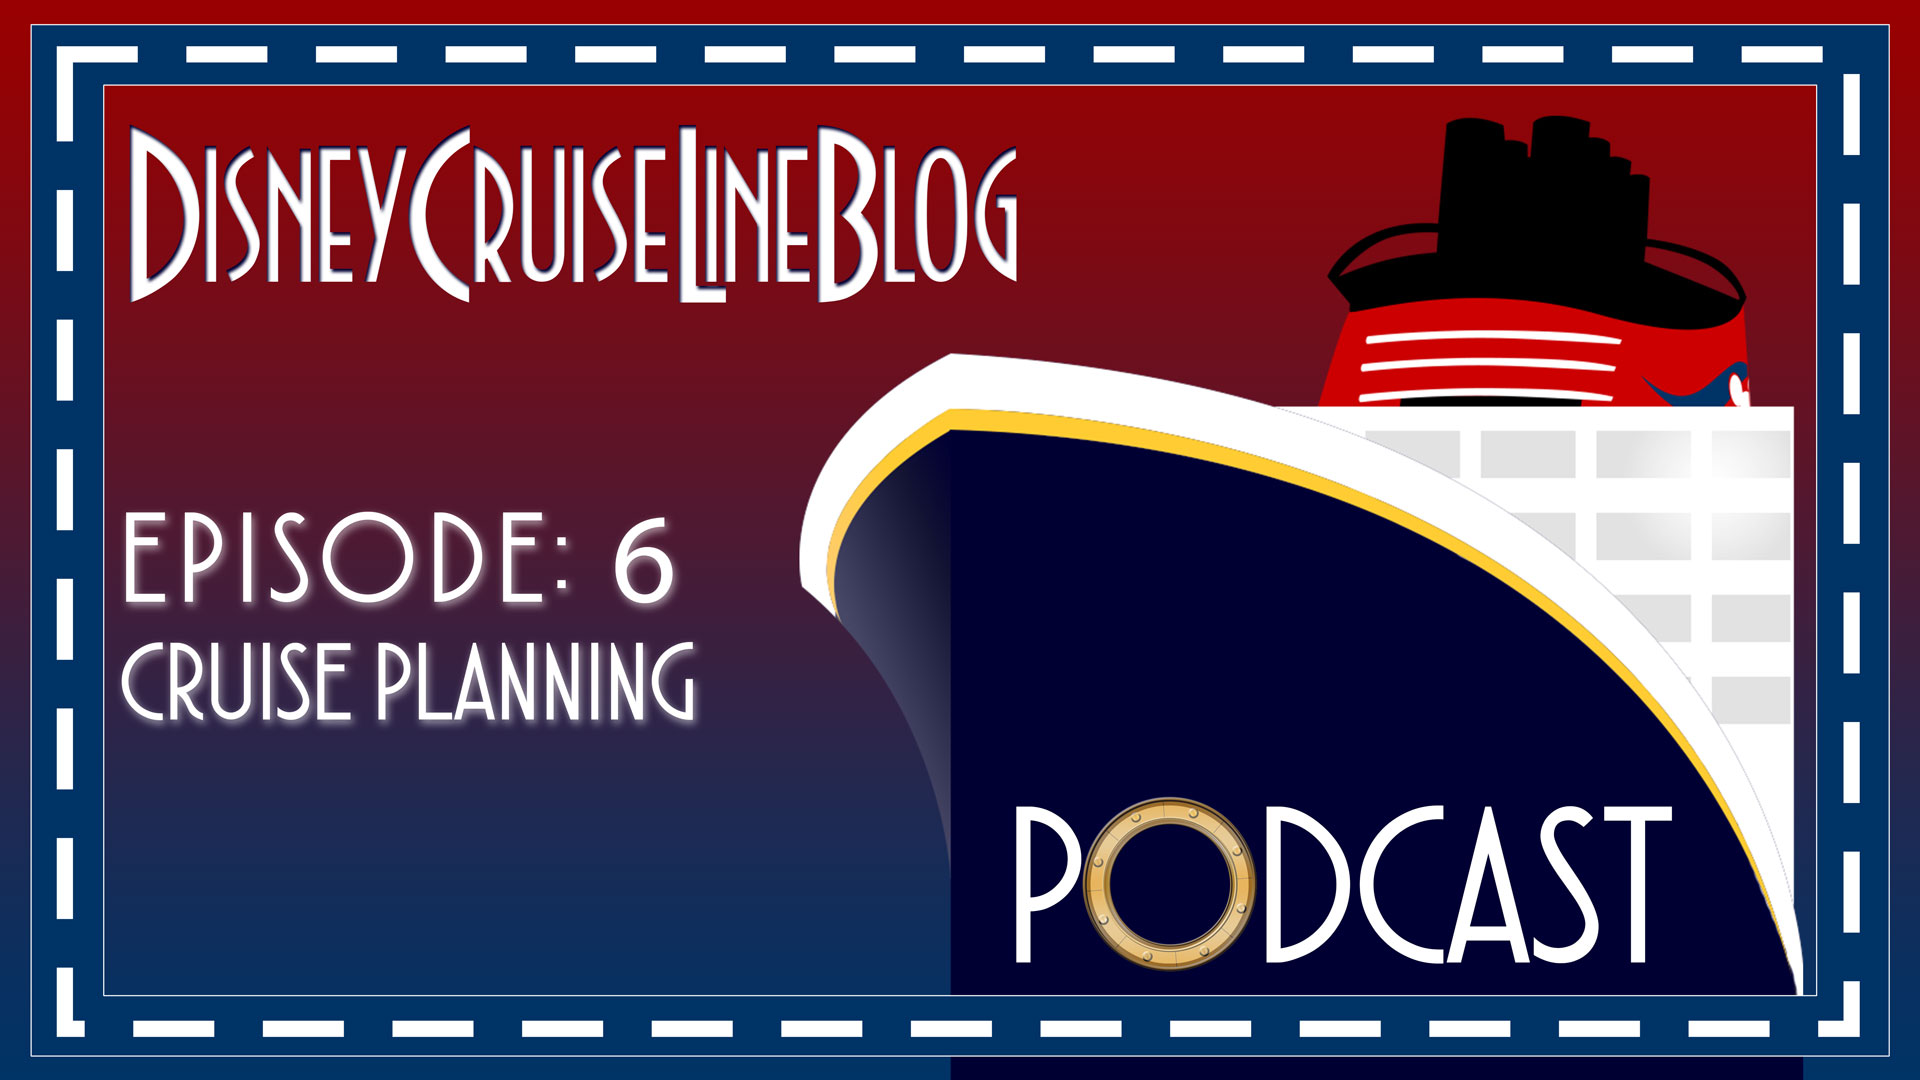 DCL Blog Podcast Episode 6 Cruise Planning